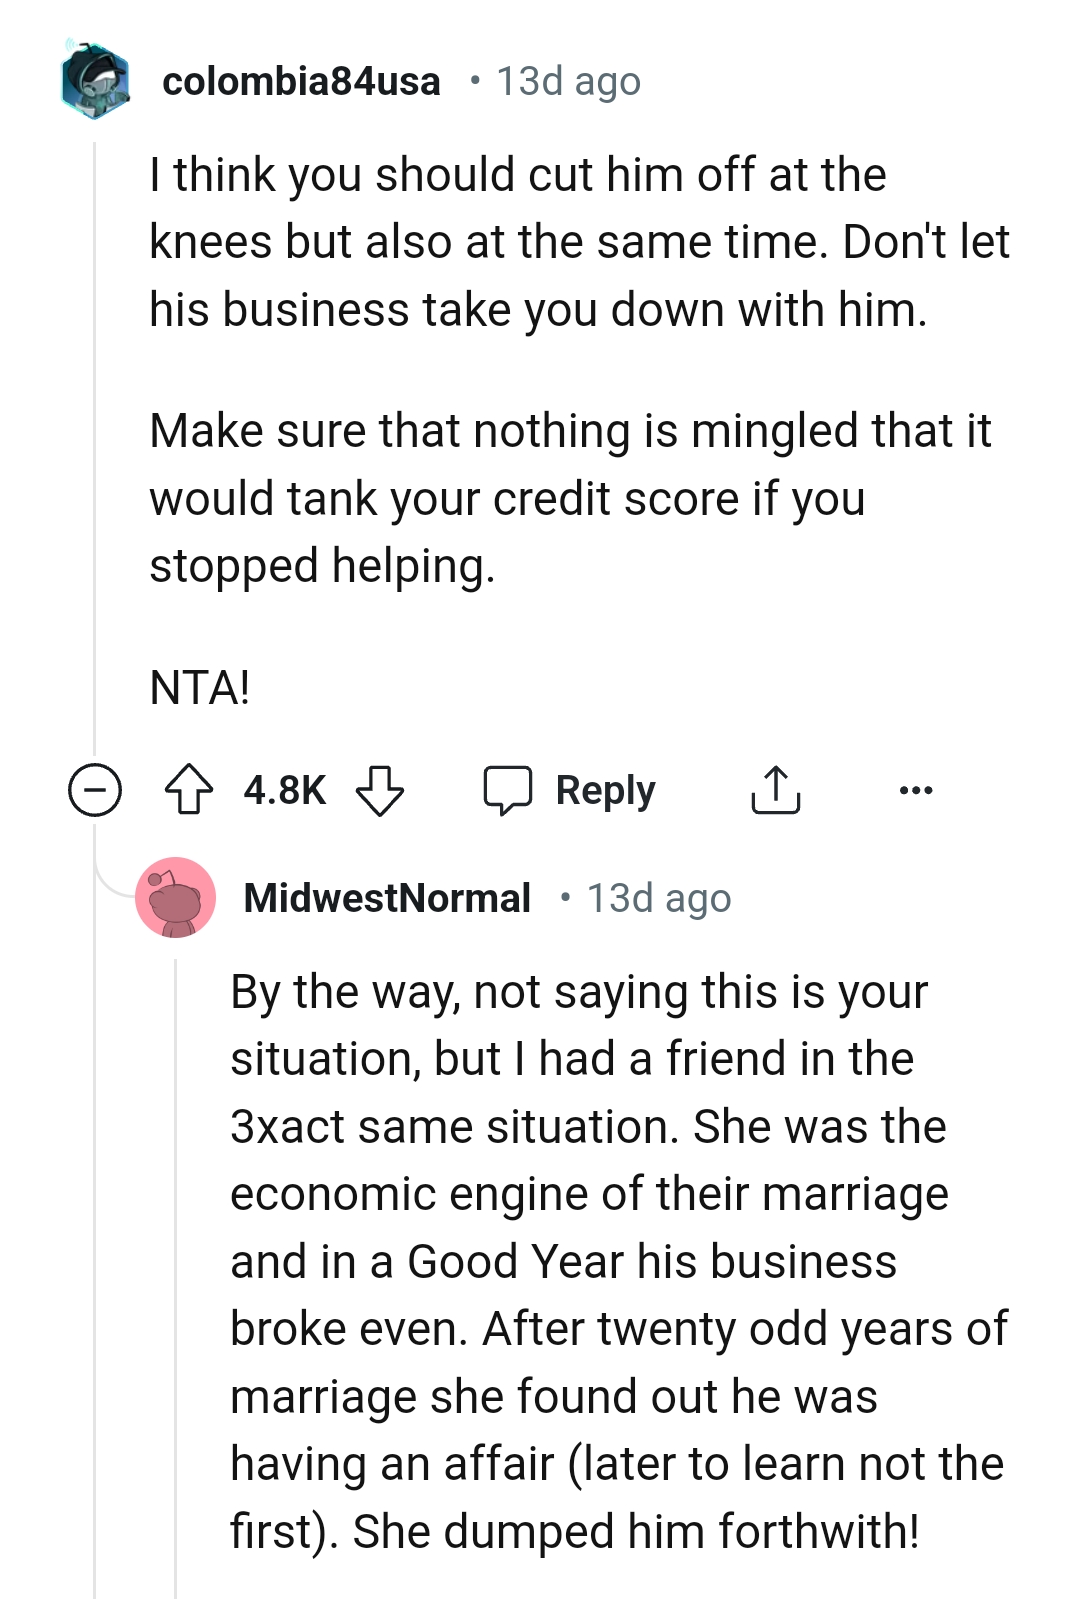 Don't let his business take you down